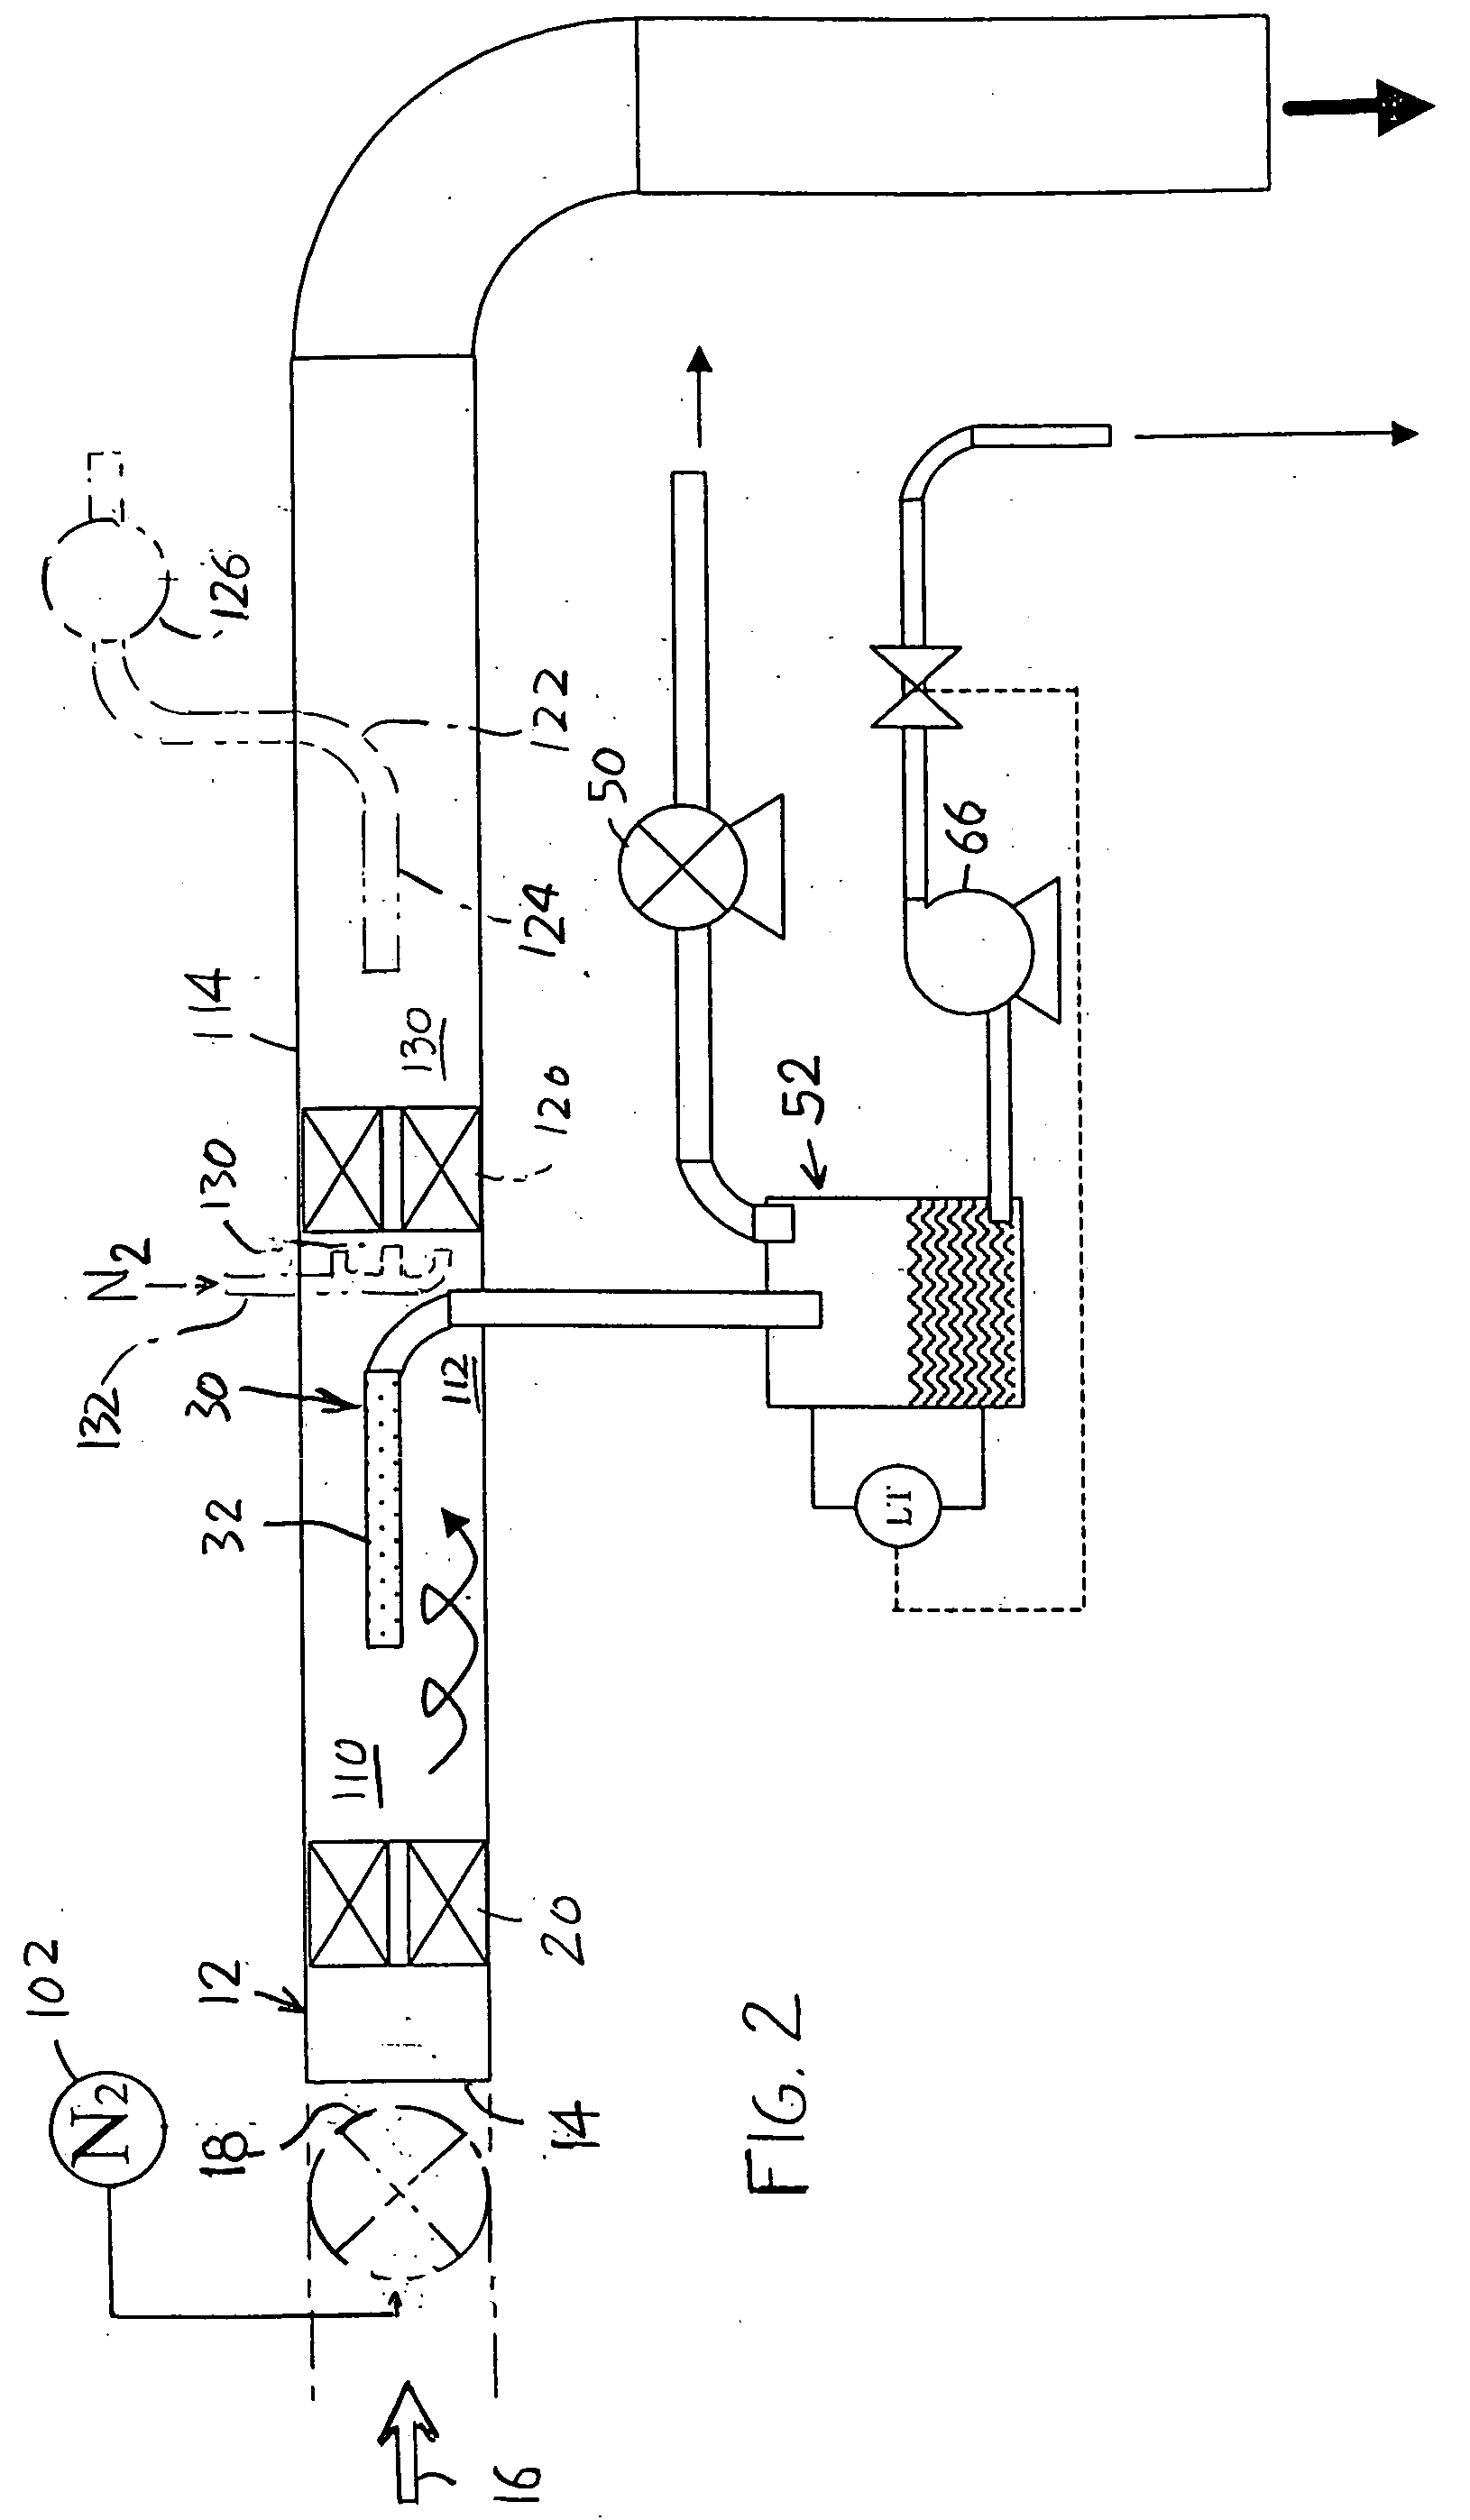 Gas/liquid separation in water injection into hydrocarbon reservoir